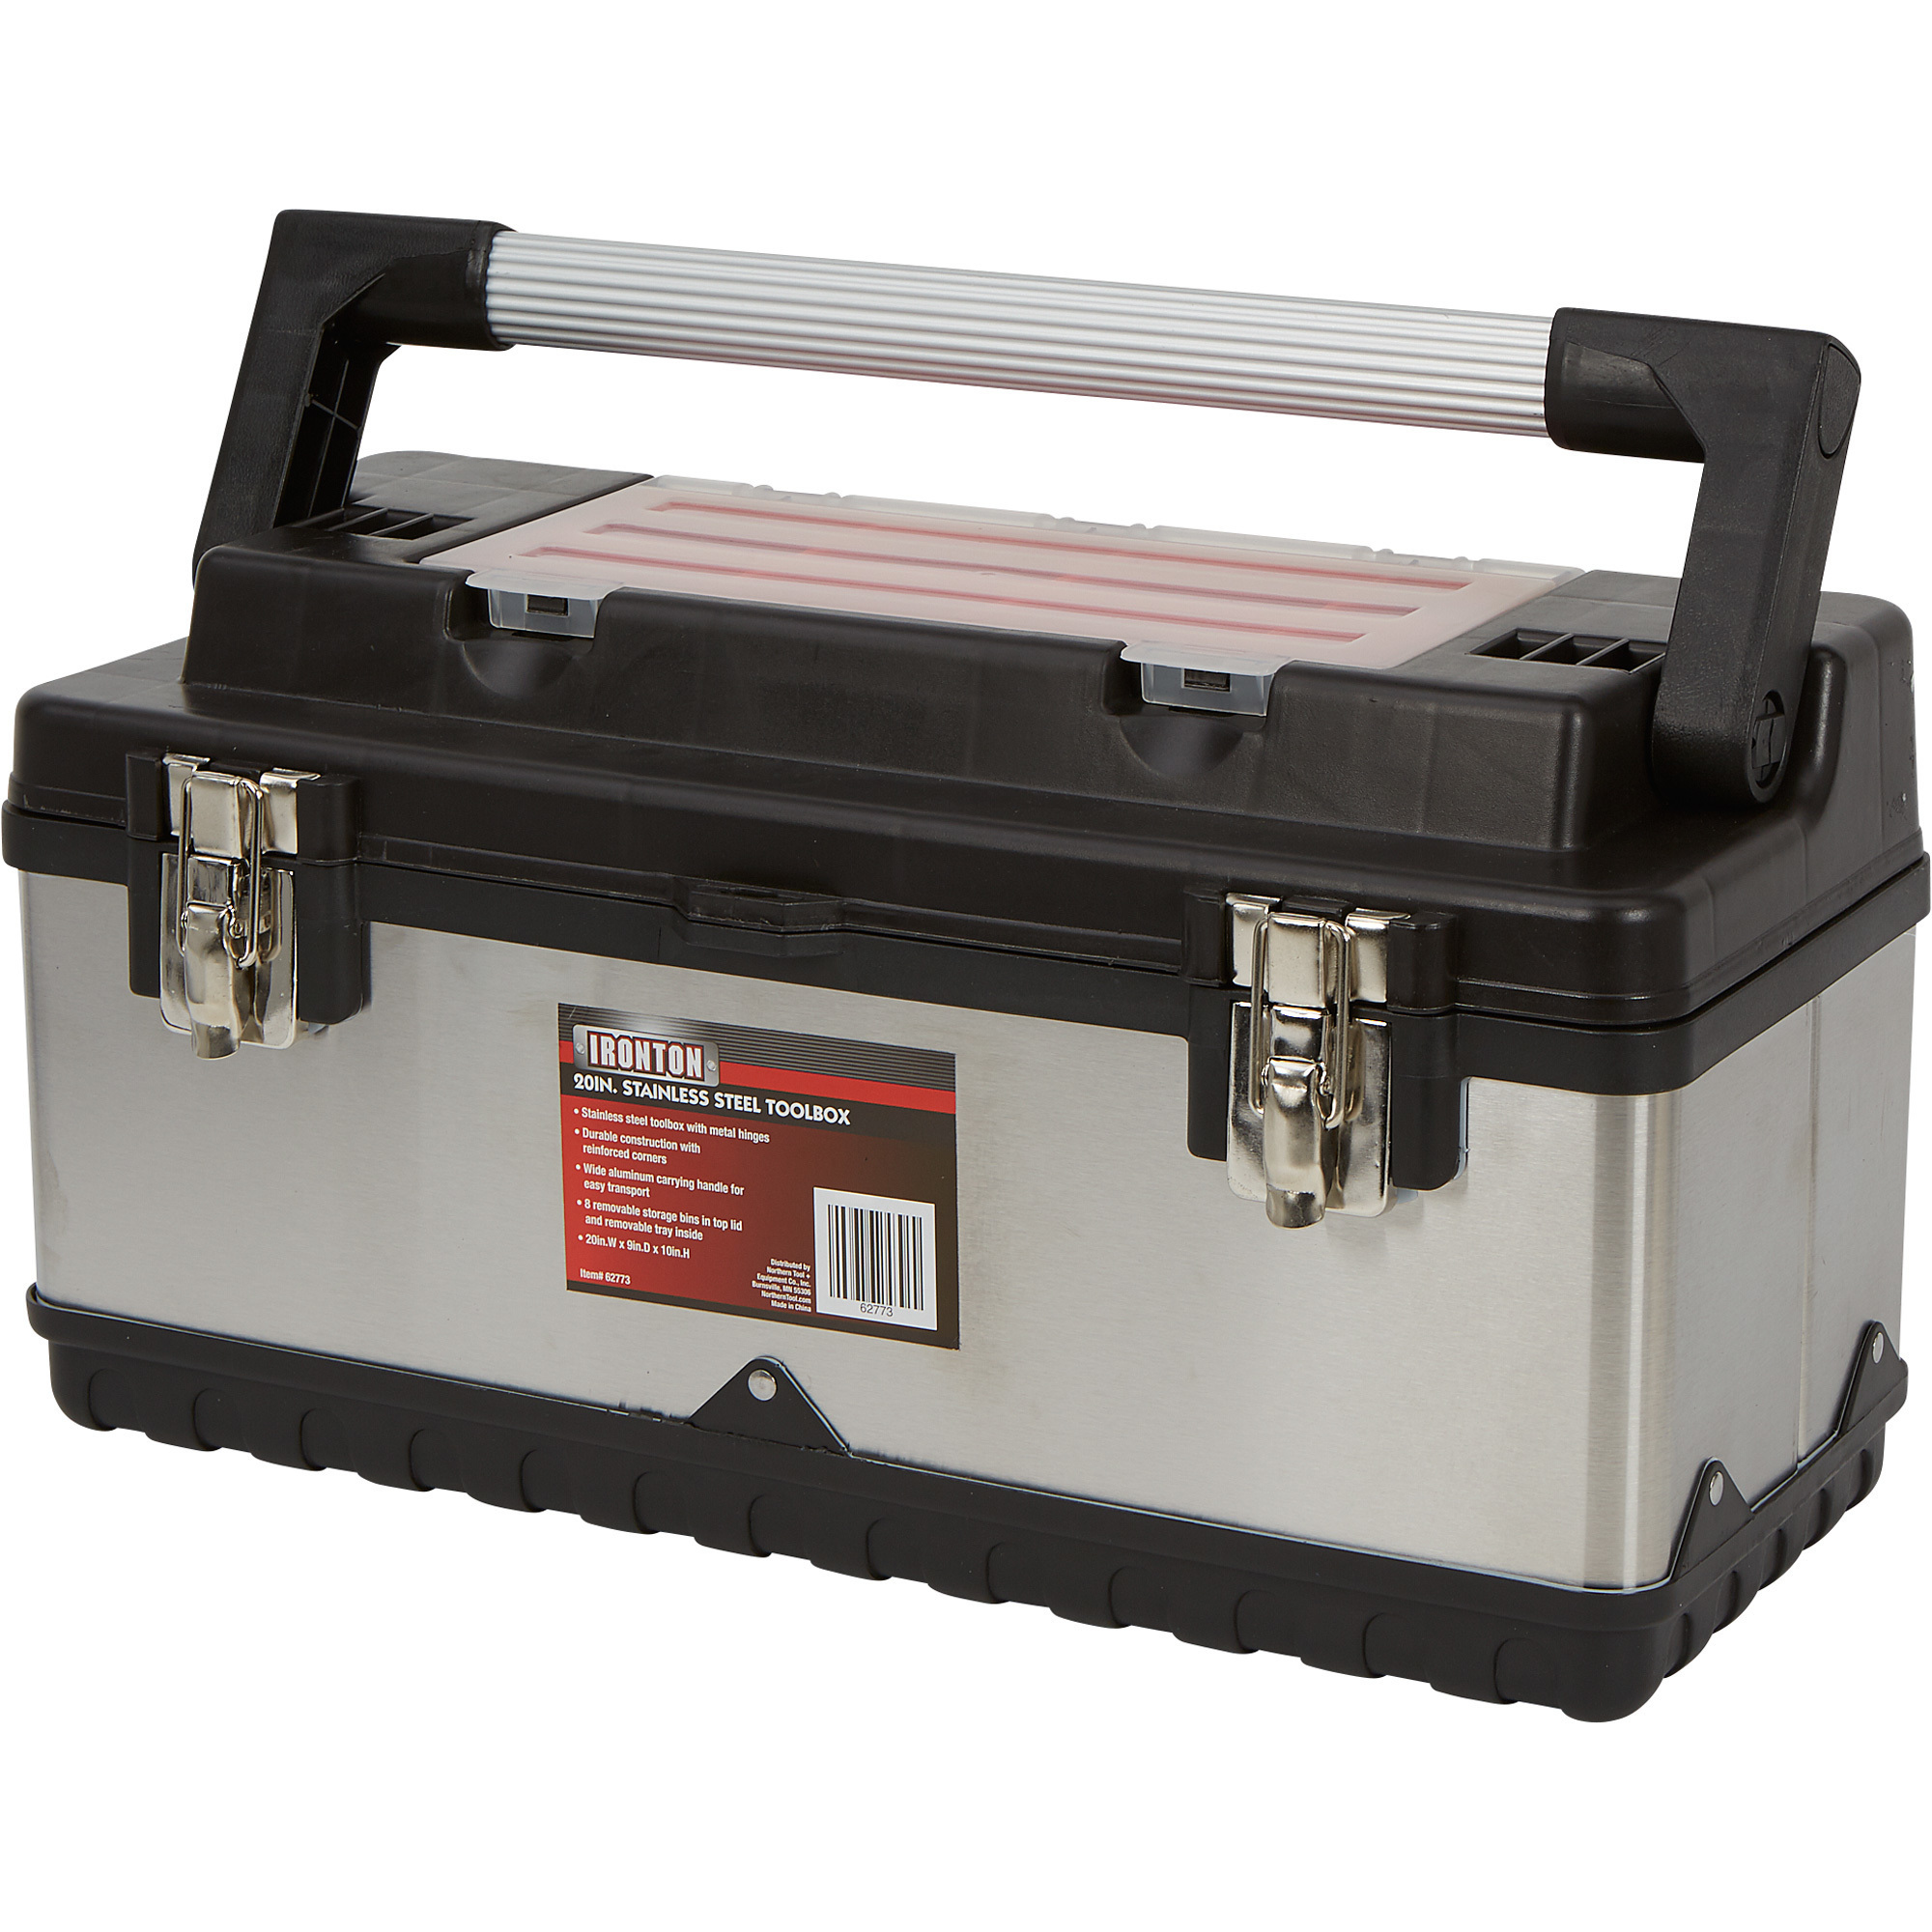 Ironton 20Inch Stainless Steel Toolbox, 20Inch W x 9Inch D x 10Inch H